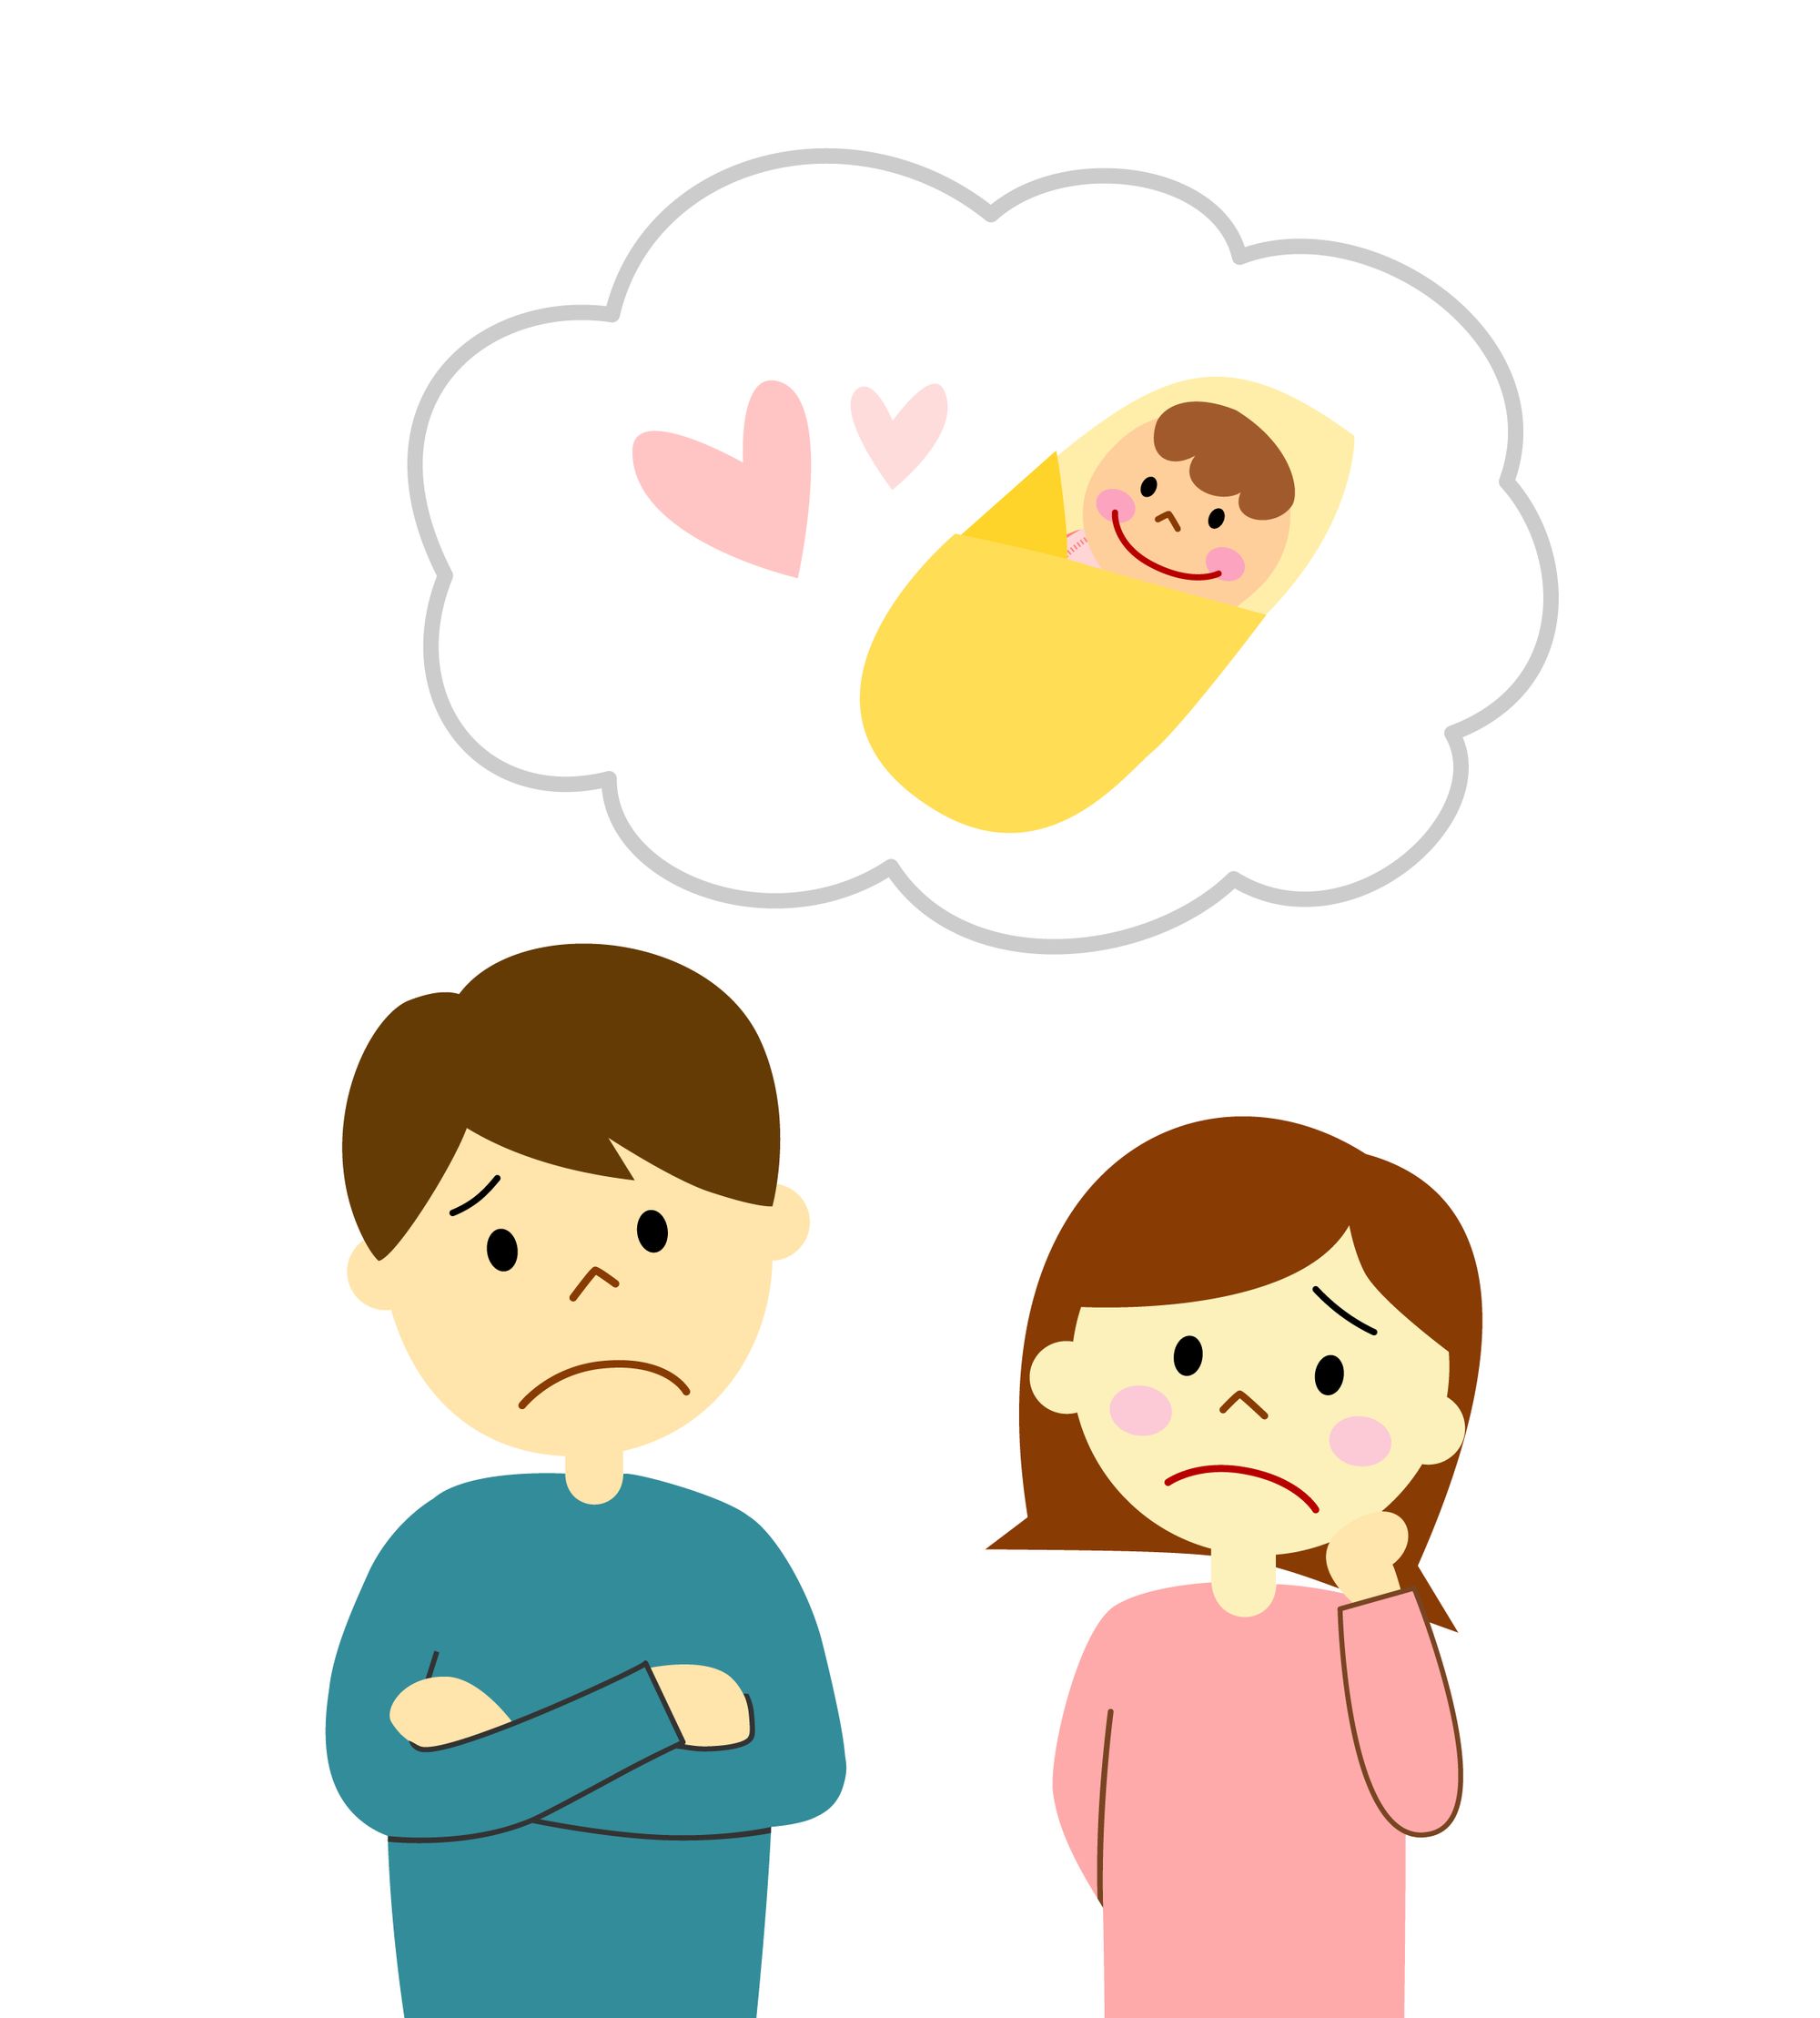 Couple thinking about a baby By cocone | www.shutterstock.com